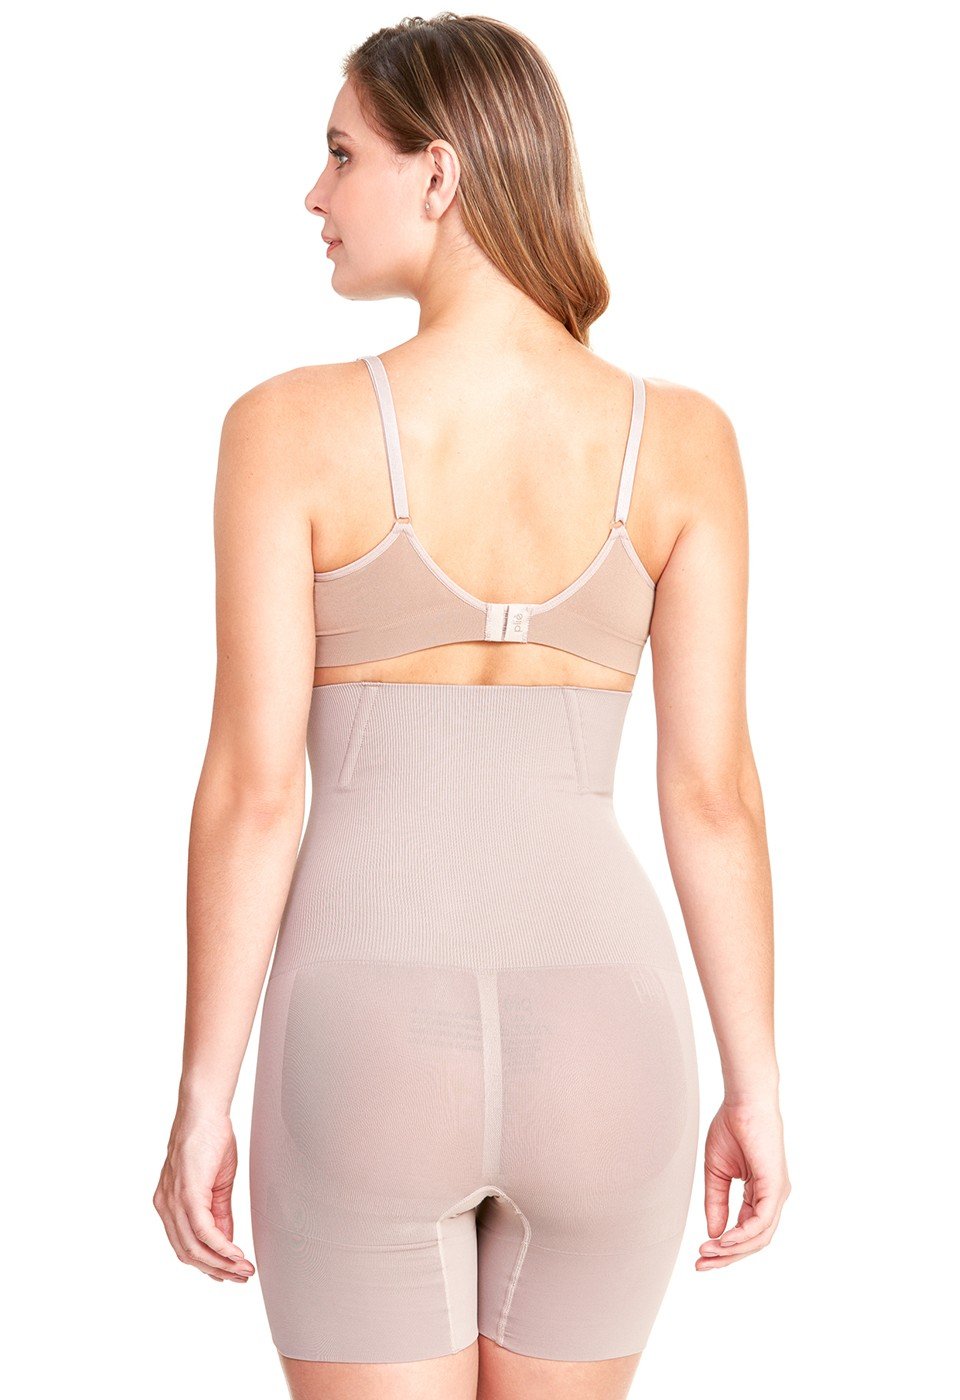 Introducing Plié Shapewear from Brazil to South Africa! Are you lookin